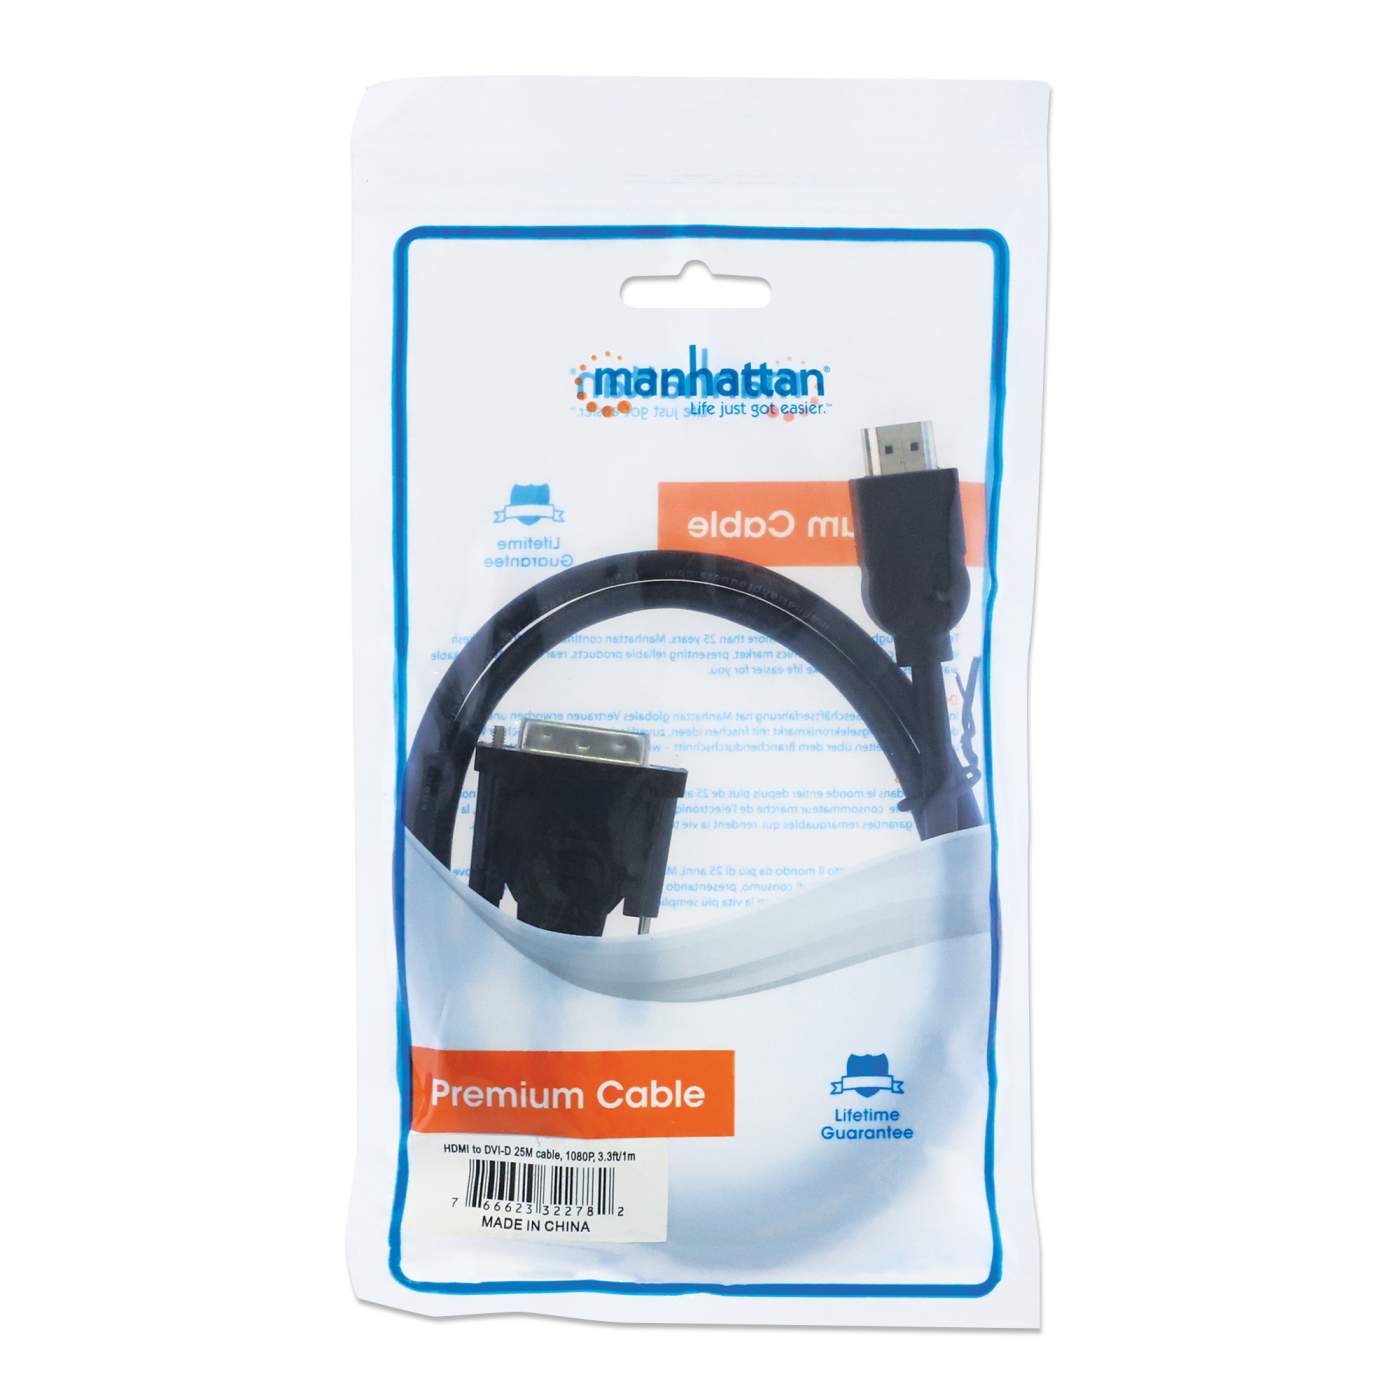 HDMI to DVI-D Cable Packaging Image 2